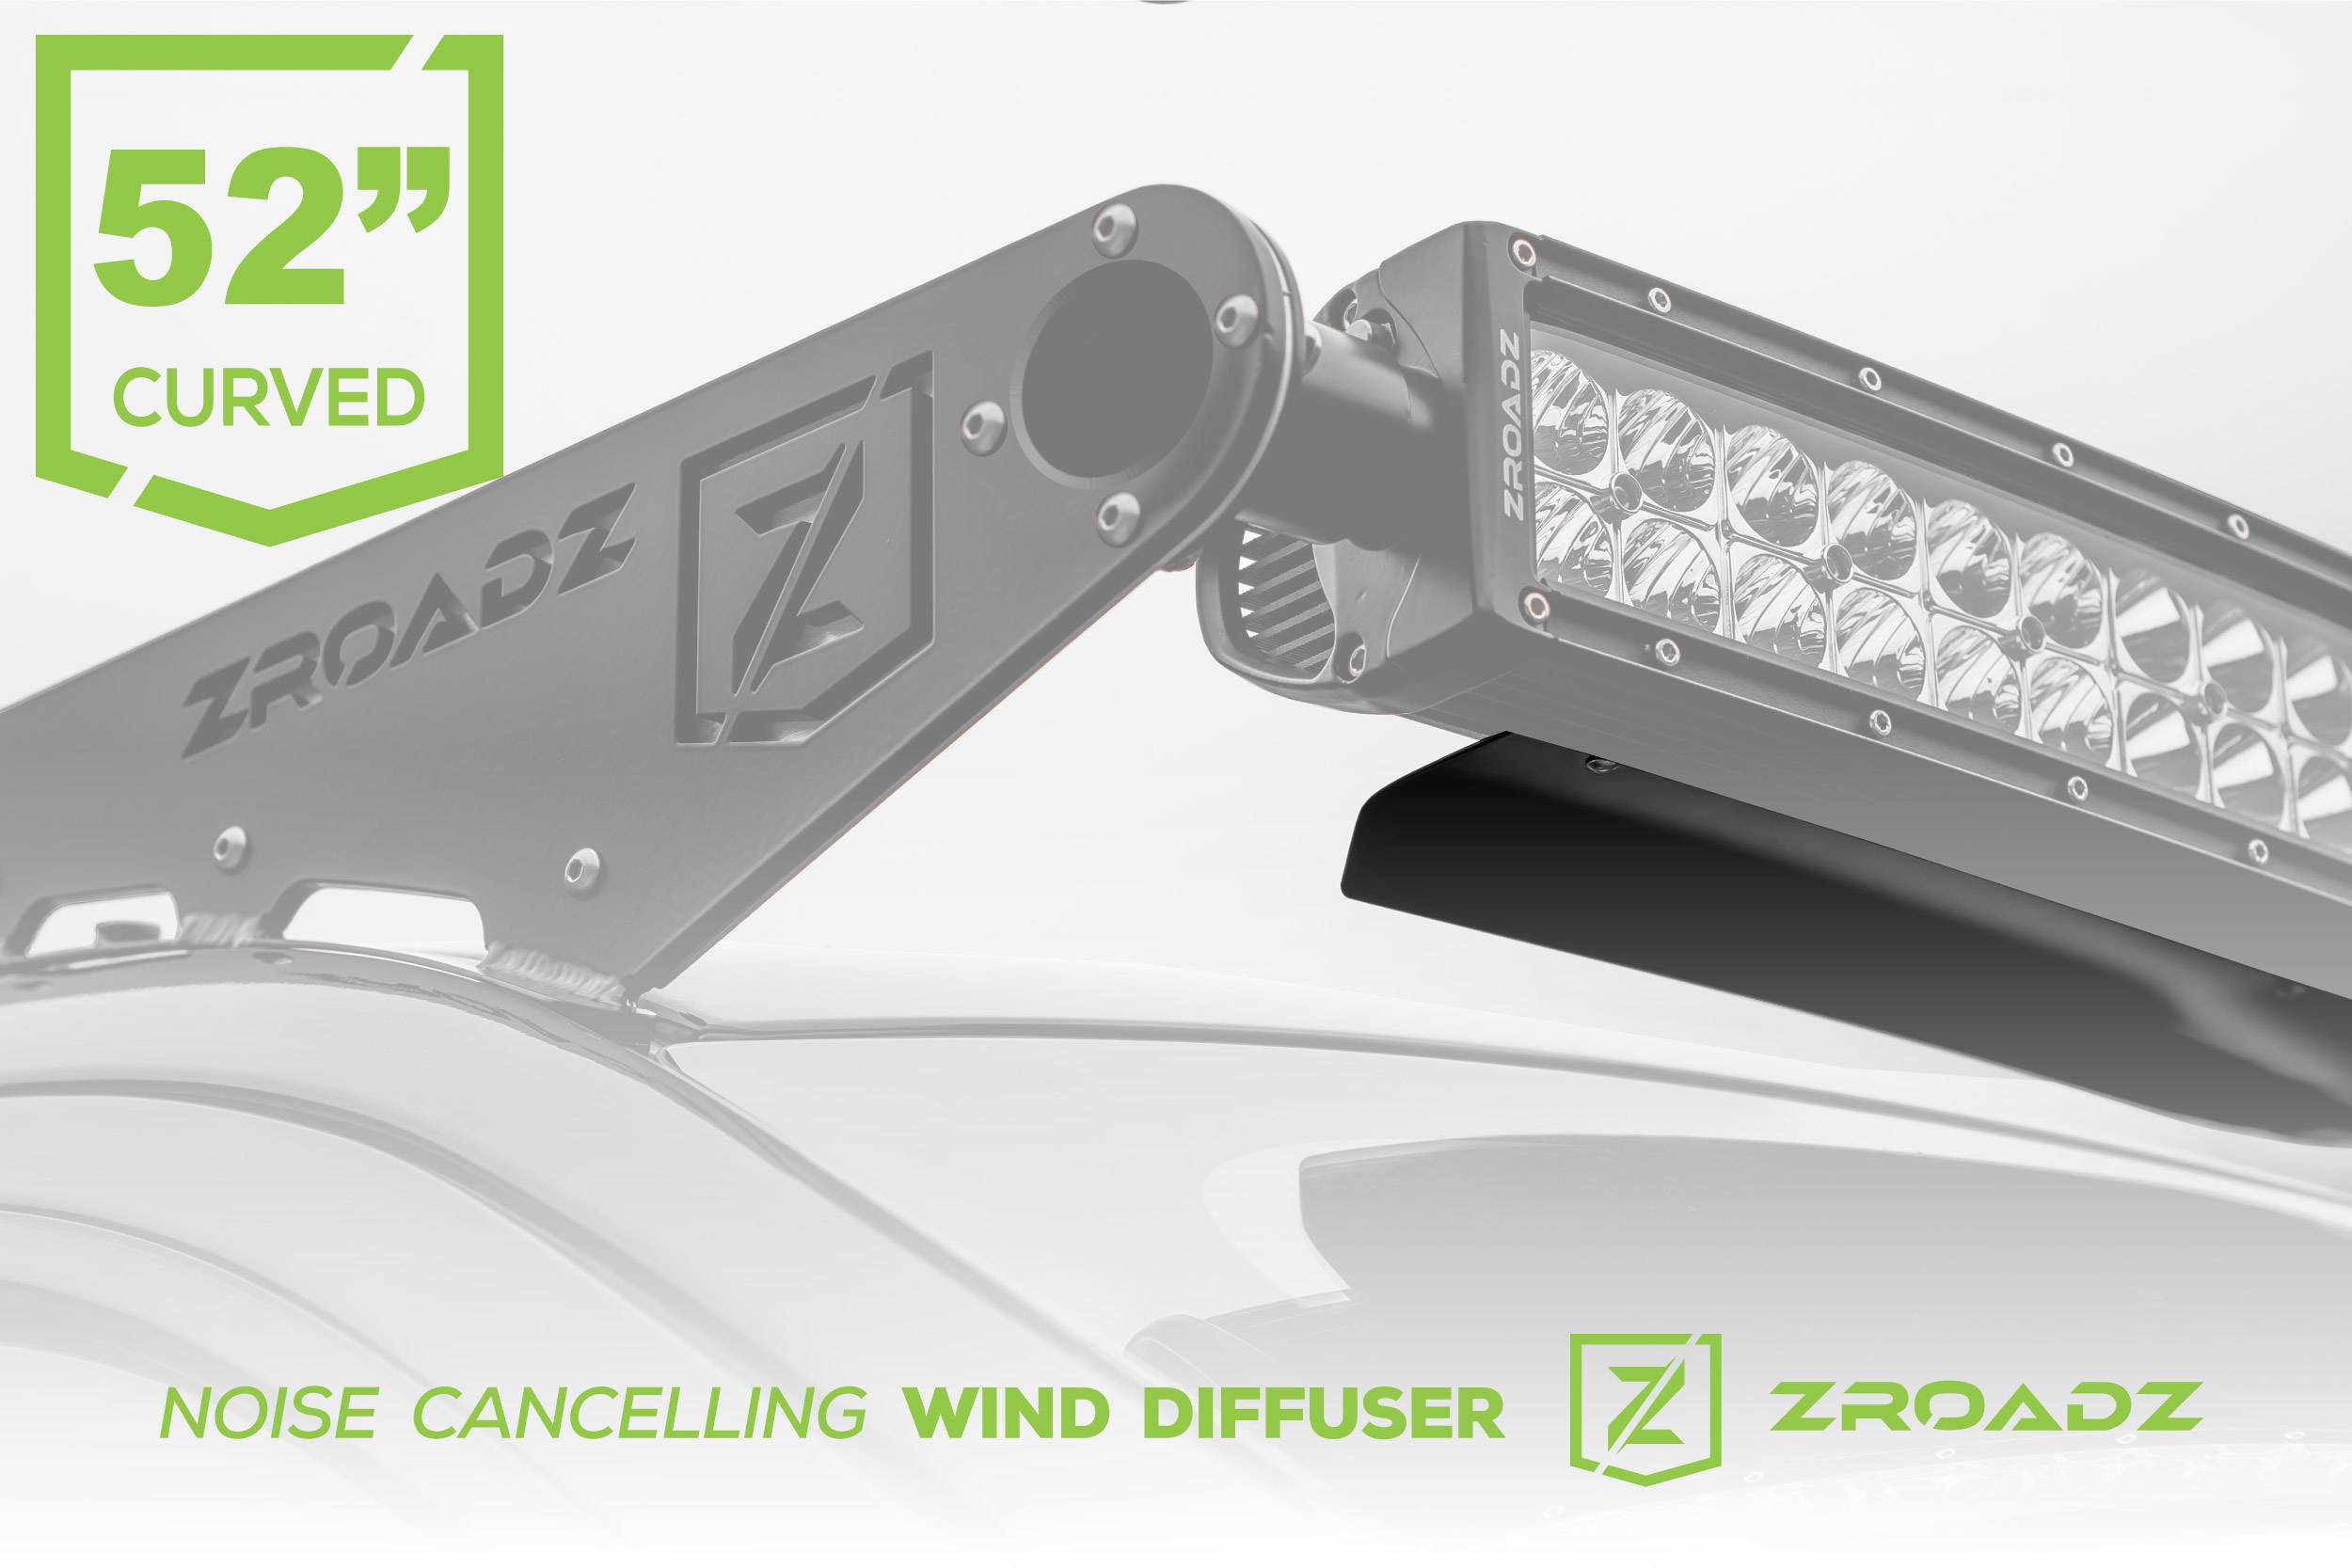 ZROADZ OFF ROAD PRODUCTS - Noise Cancelling Wind Diffuser for (1) 52 Inch Curved Double Row LED Light Bar - PN #Z330052C